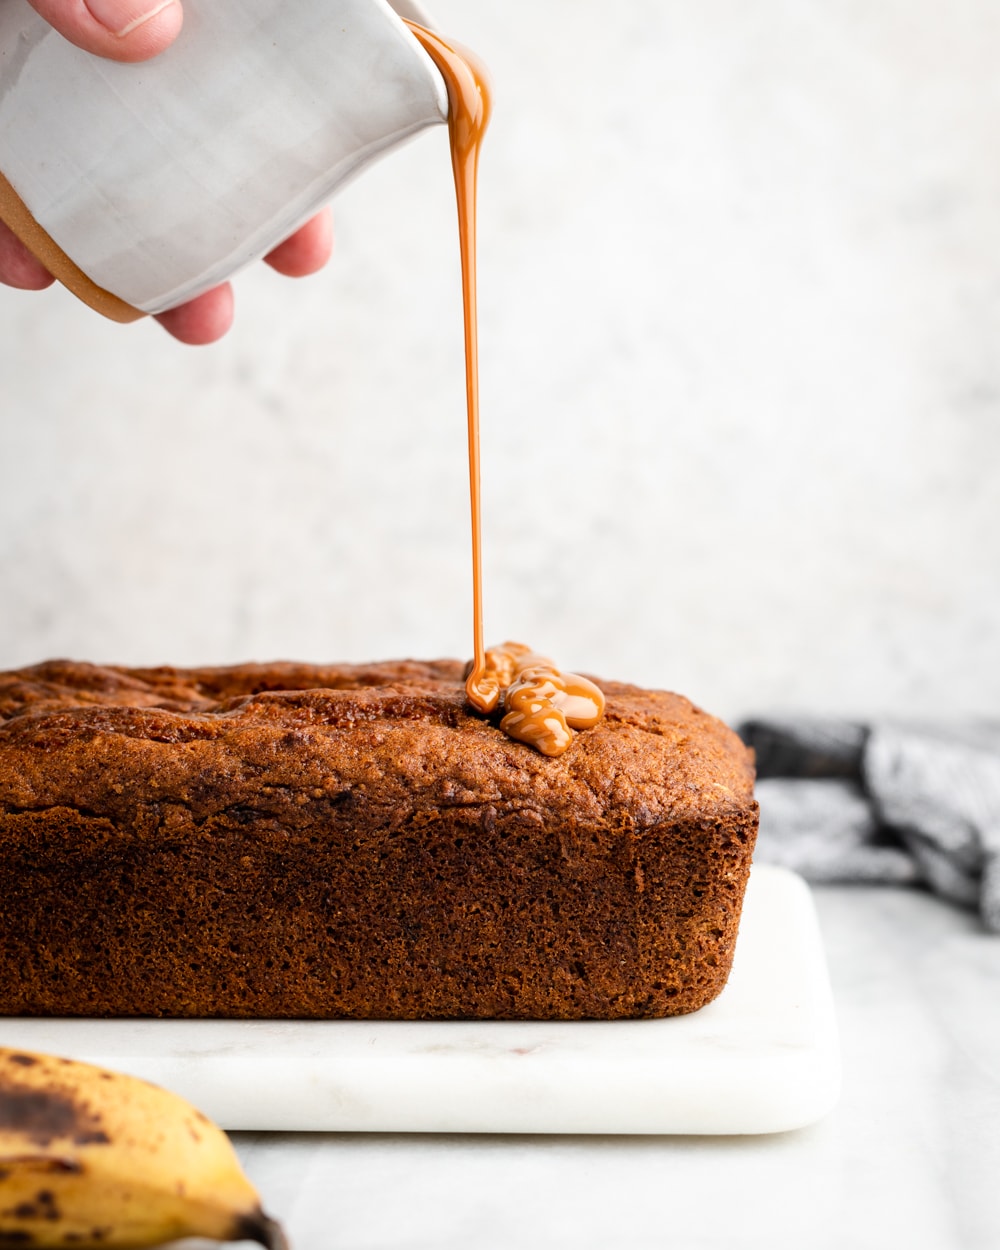 baked banana bread with dulce de leche being poured on top